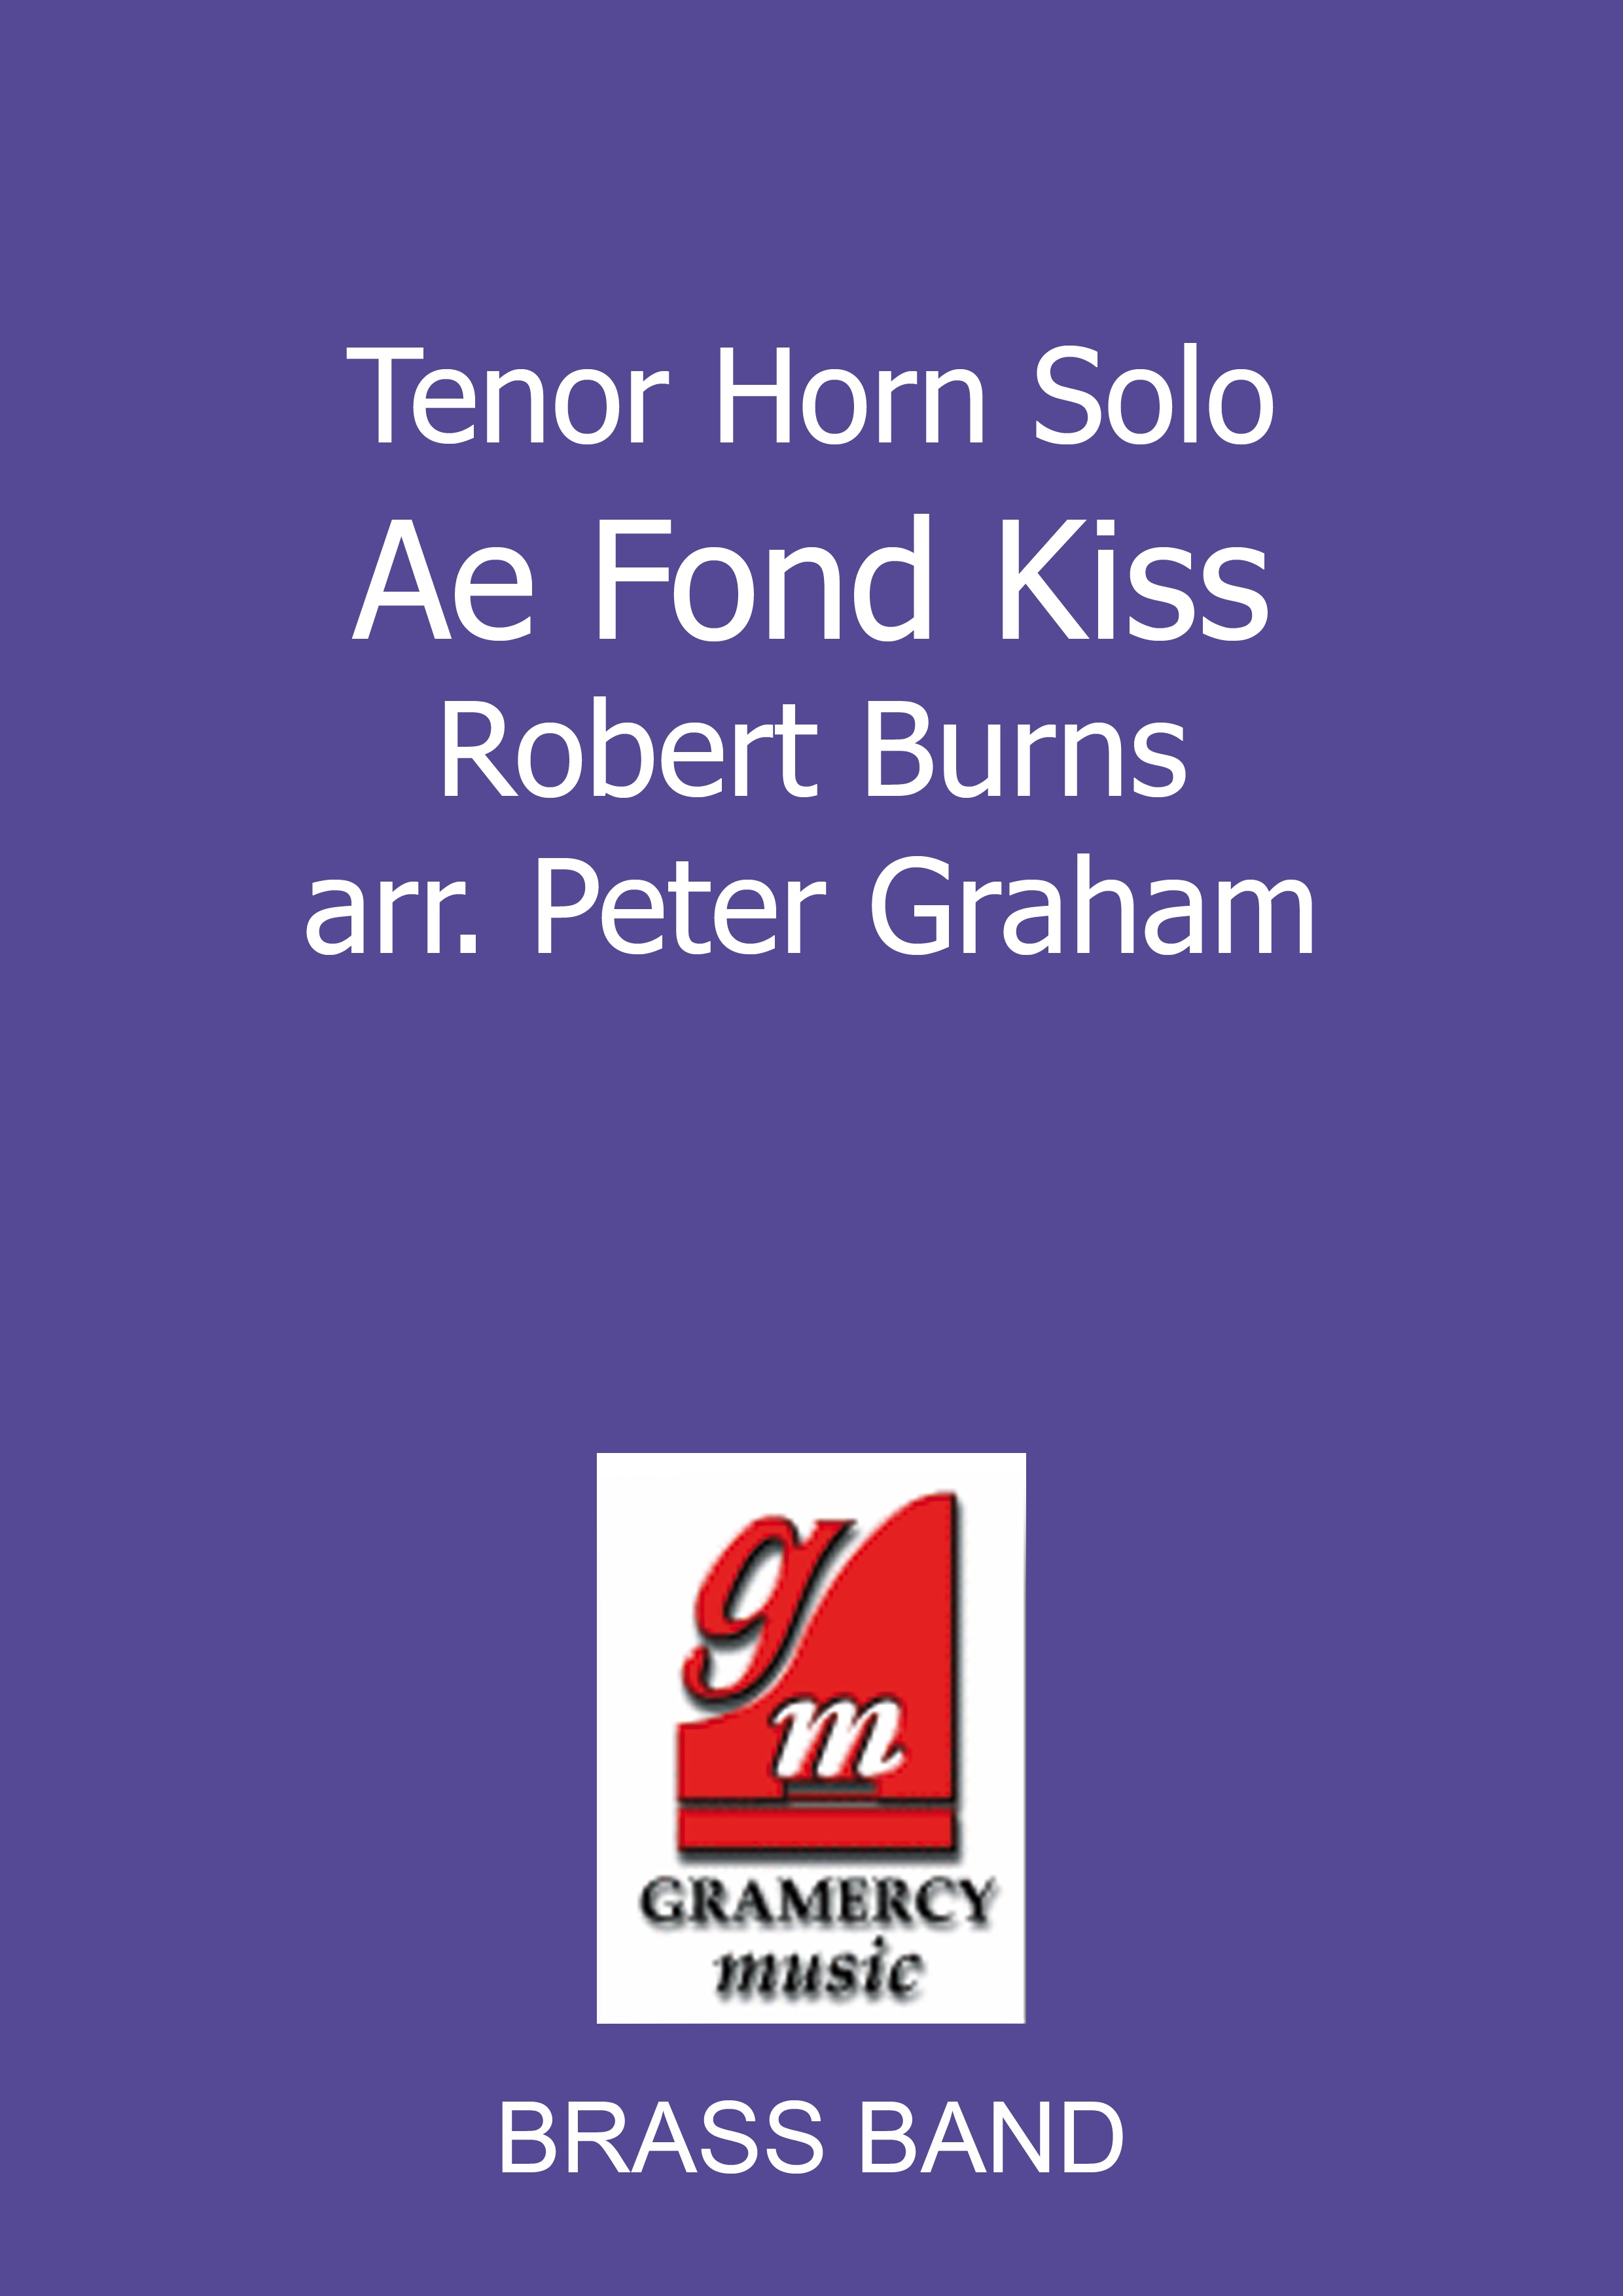 Ae Fond Kiss (Tenor Horn Solo with Brass Band - Score and Parts)